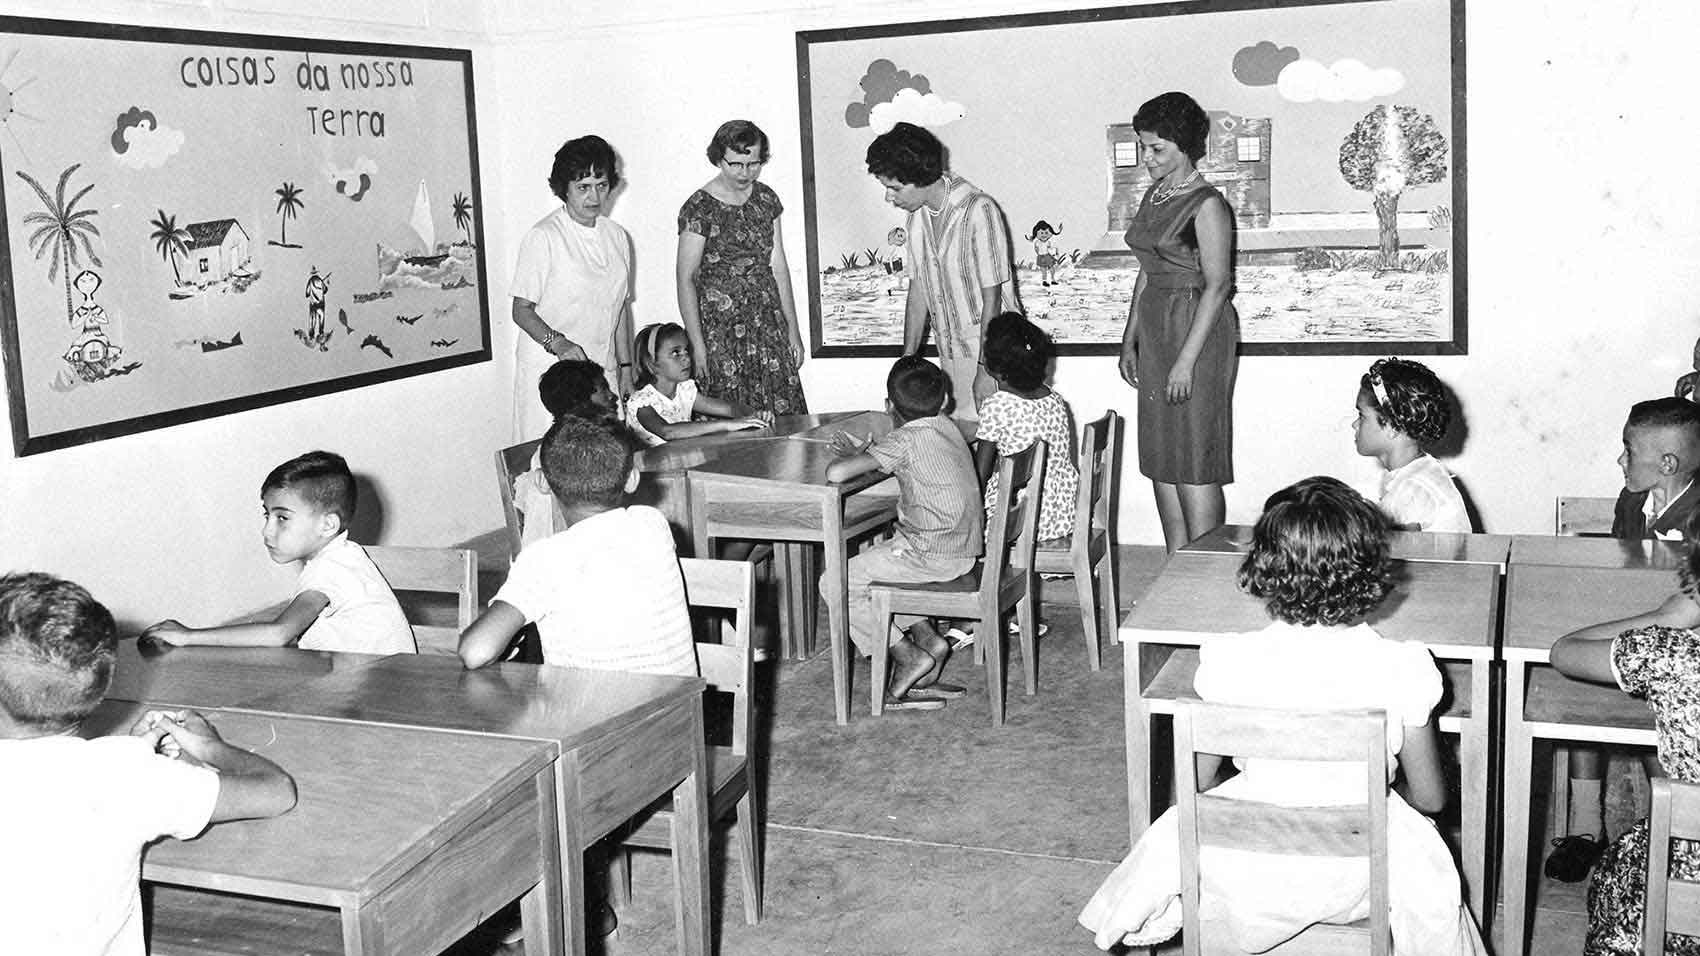 Escola Johnson around the time it was established in the 1960s